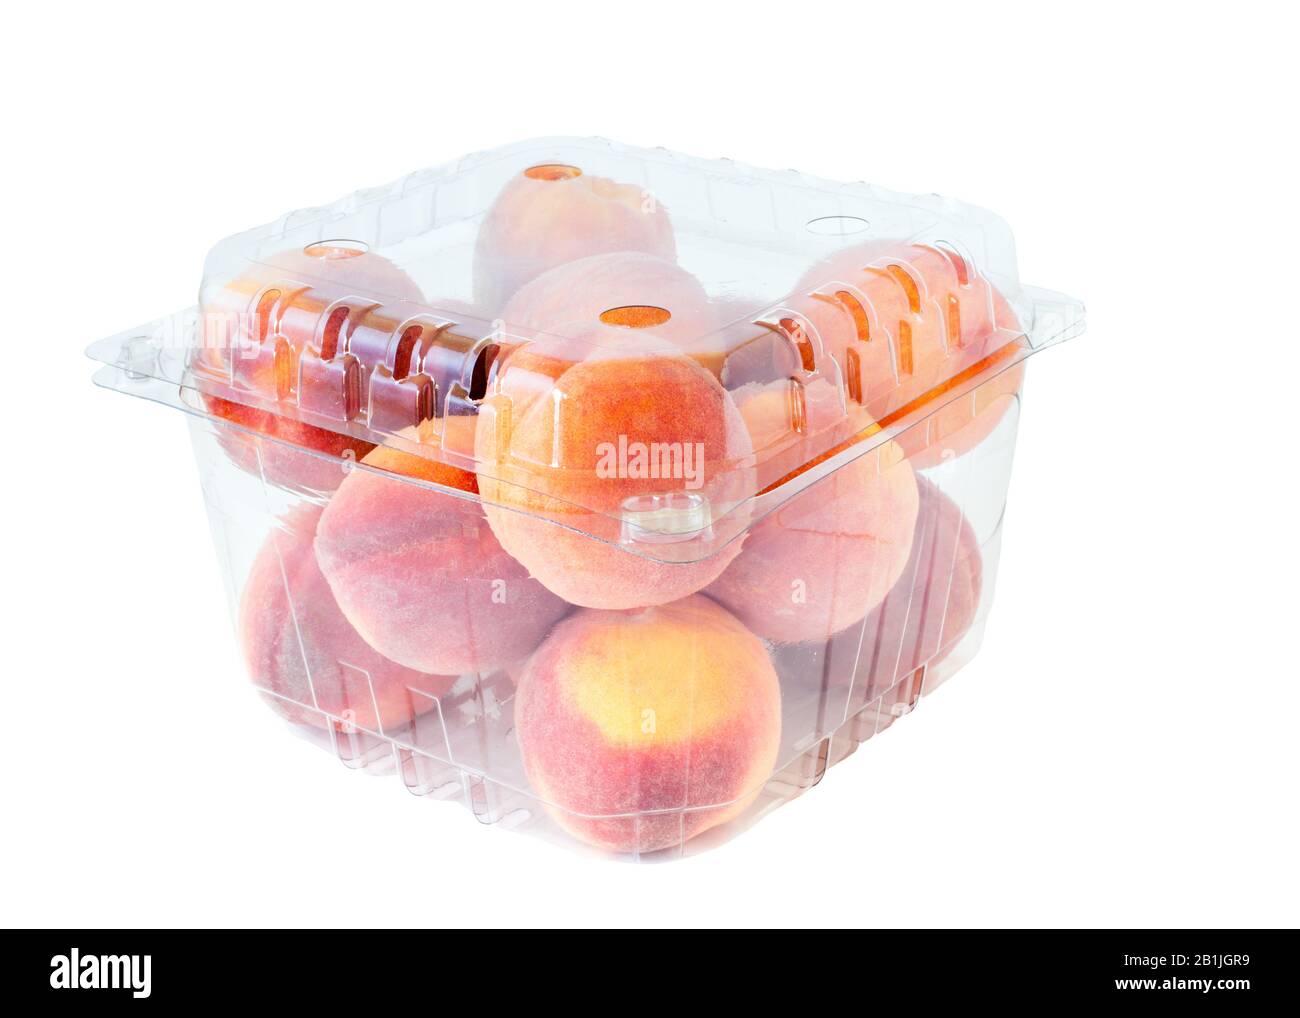 Peaches for sale in clear plastic cellophane boxes. Stock Photo